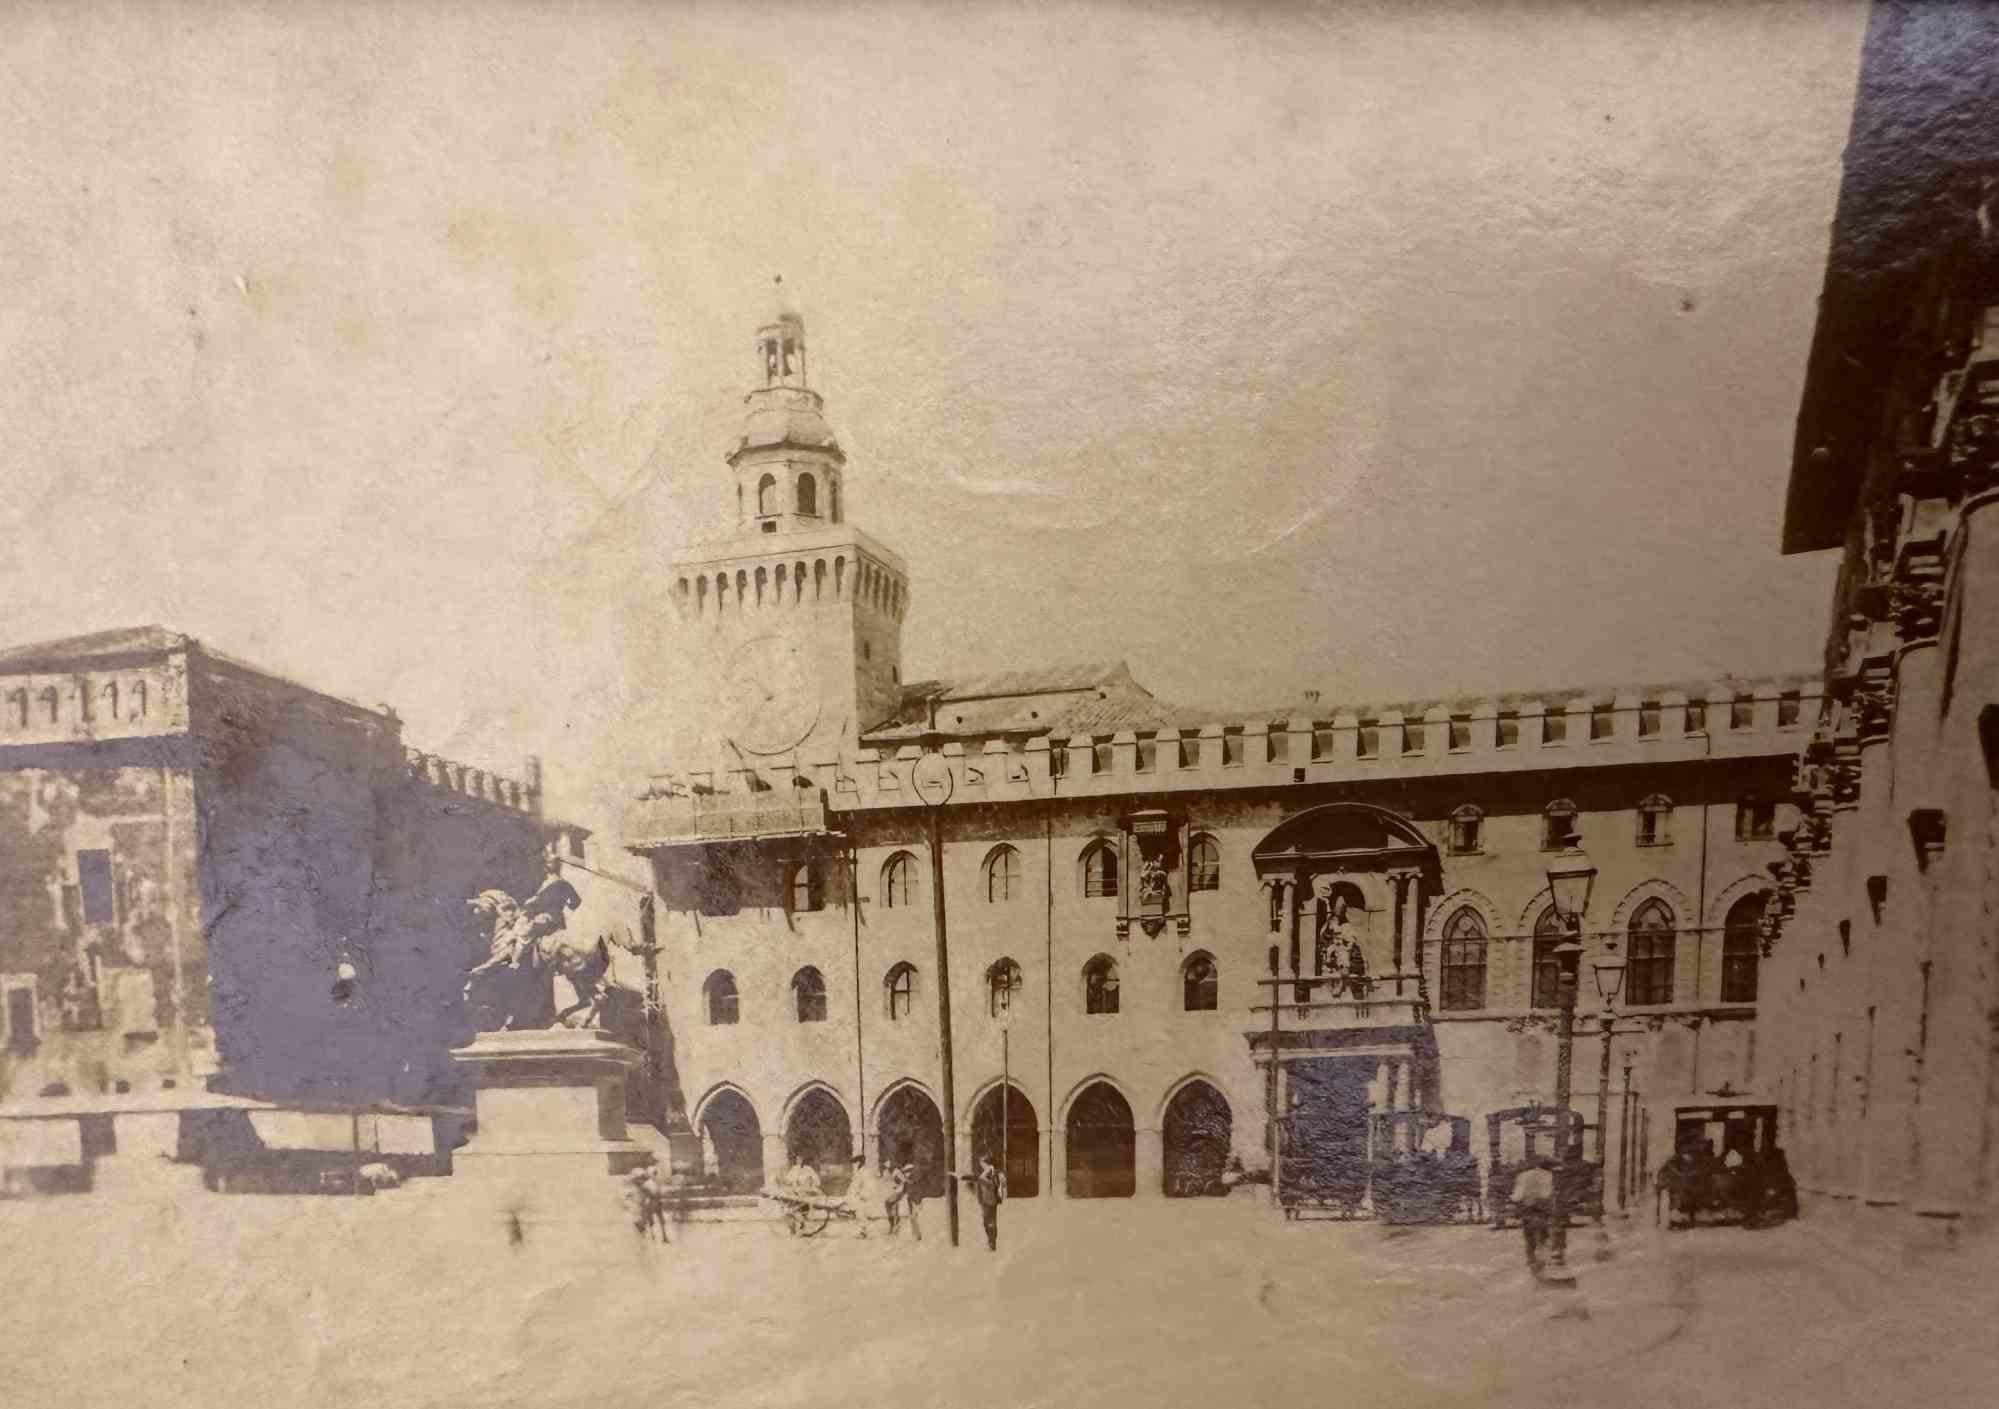 Unknown Figurative Photograph - The Old Days Photo - Piazza Vittorio Emanuele, Bologna - Early 20th Century